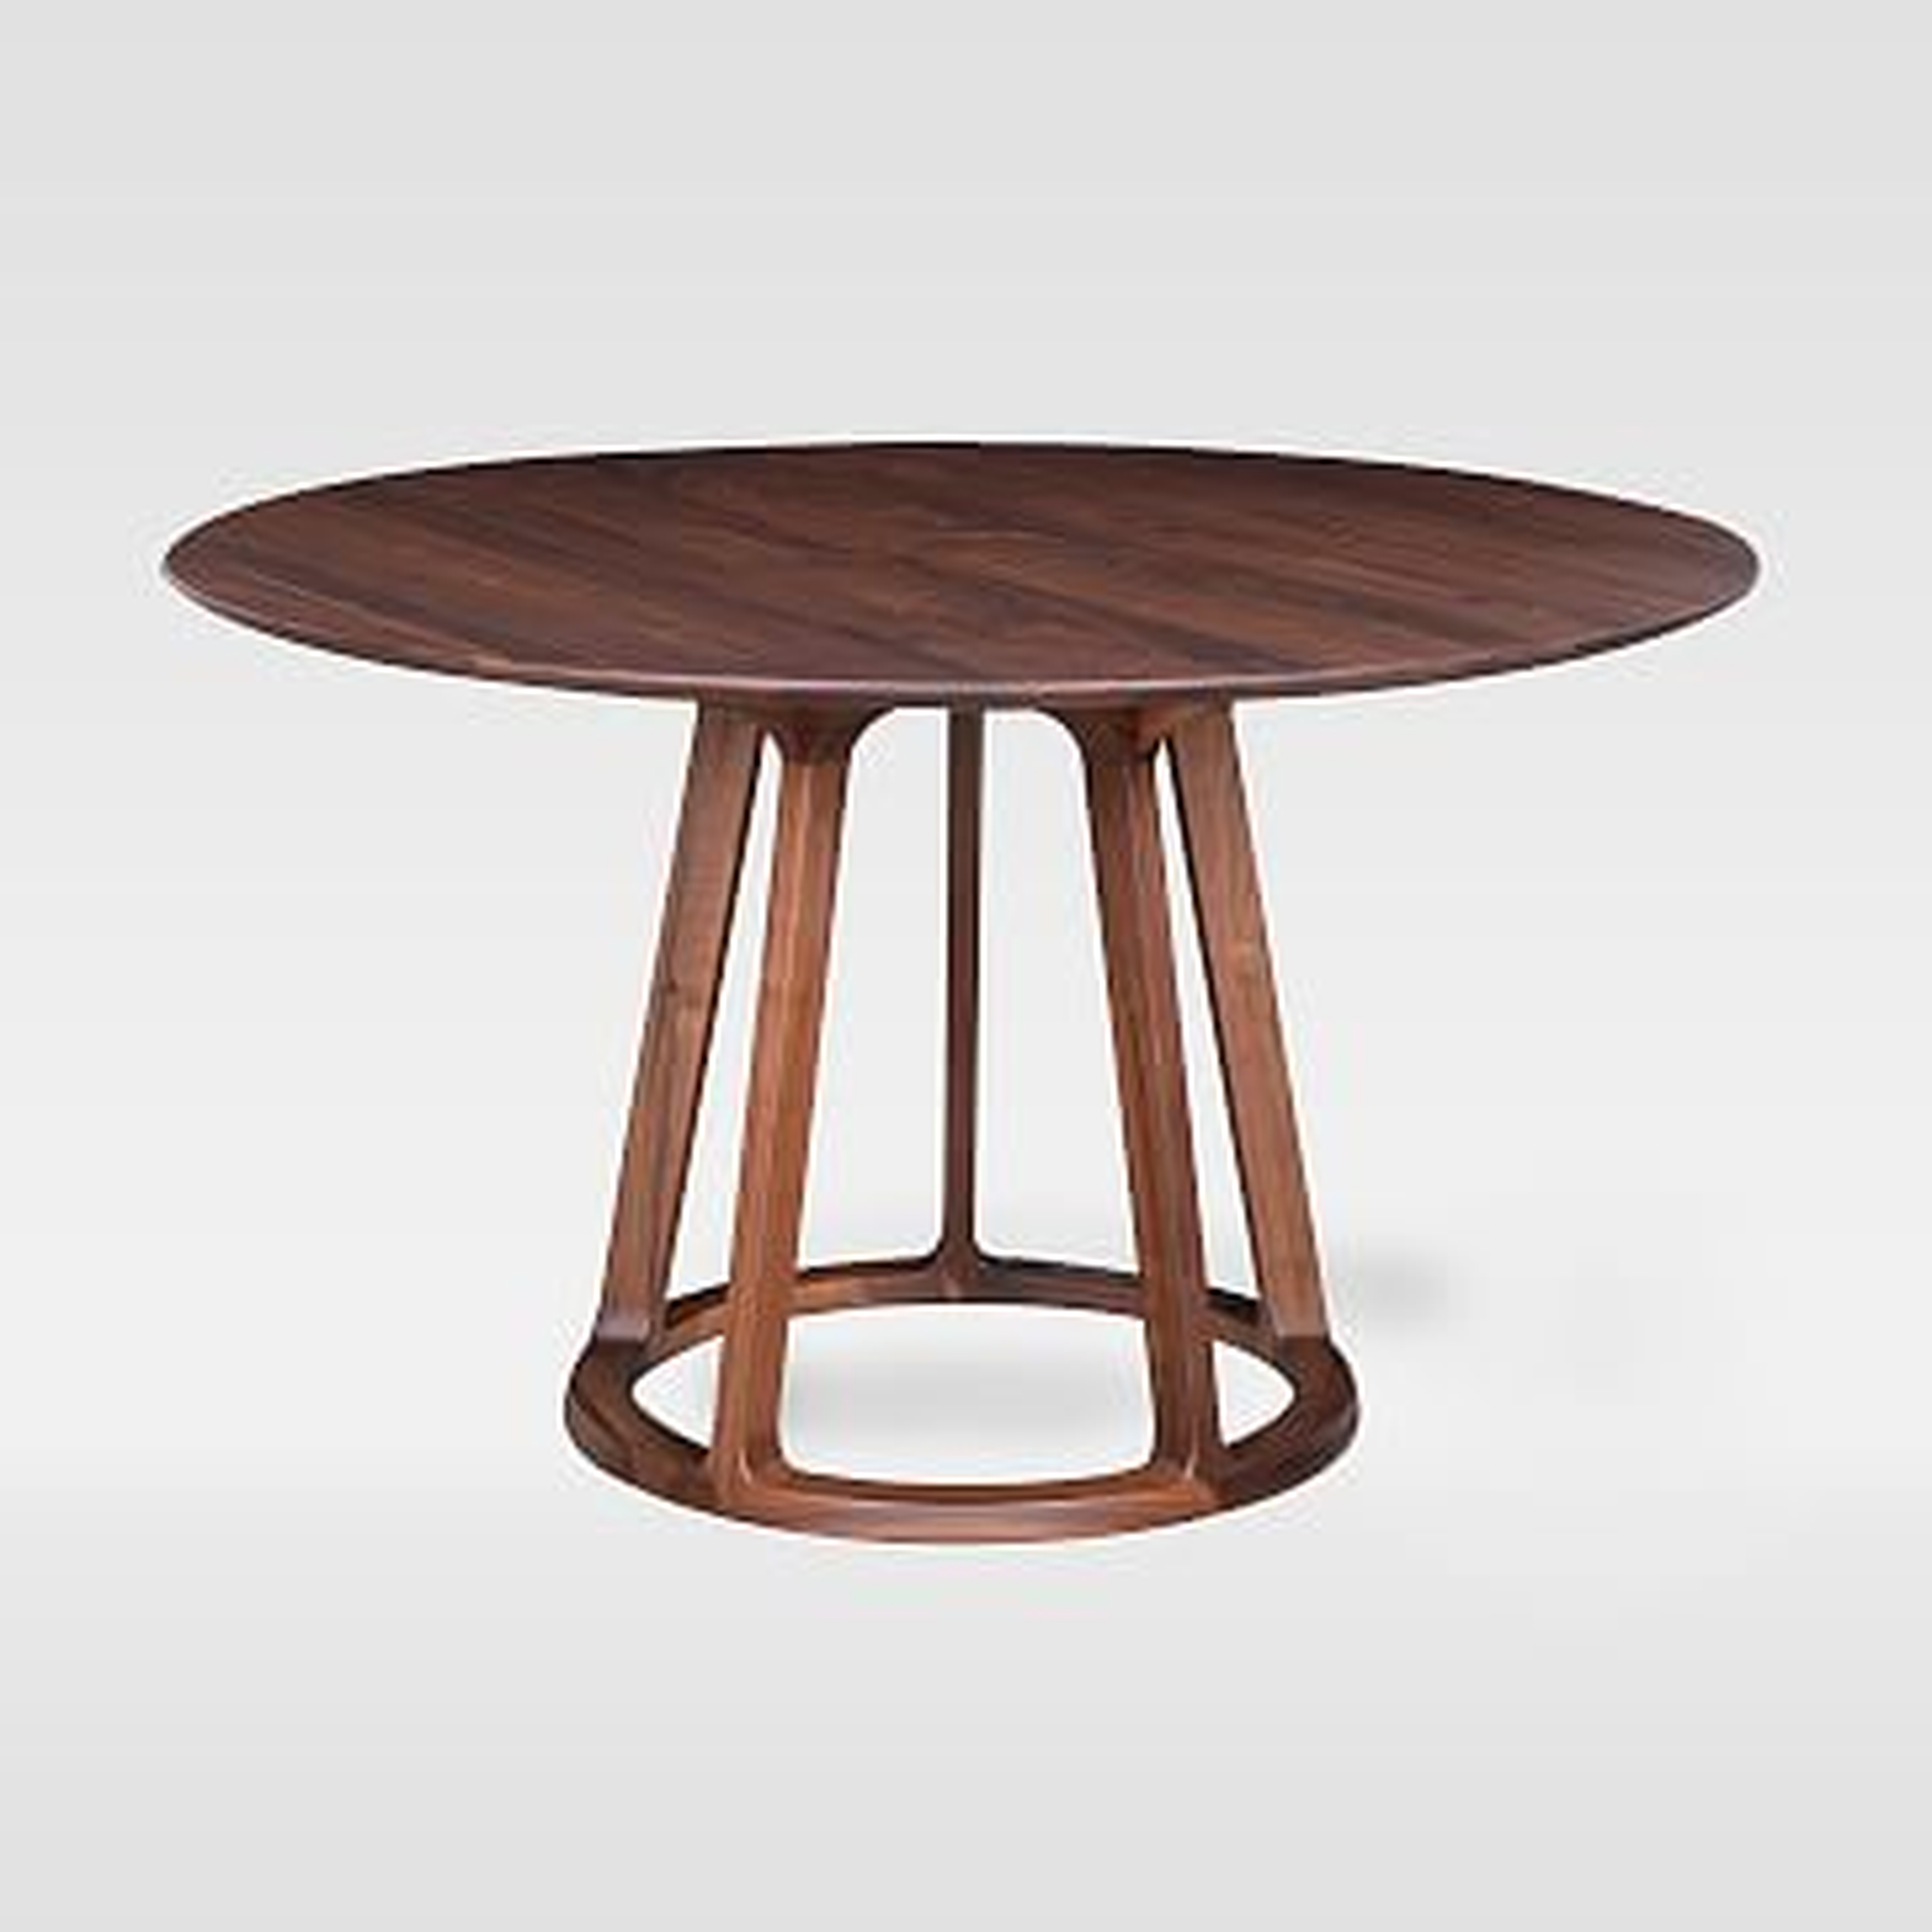 Open Pedestal Wood Round Dining Table - West Elm